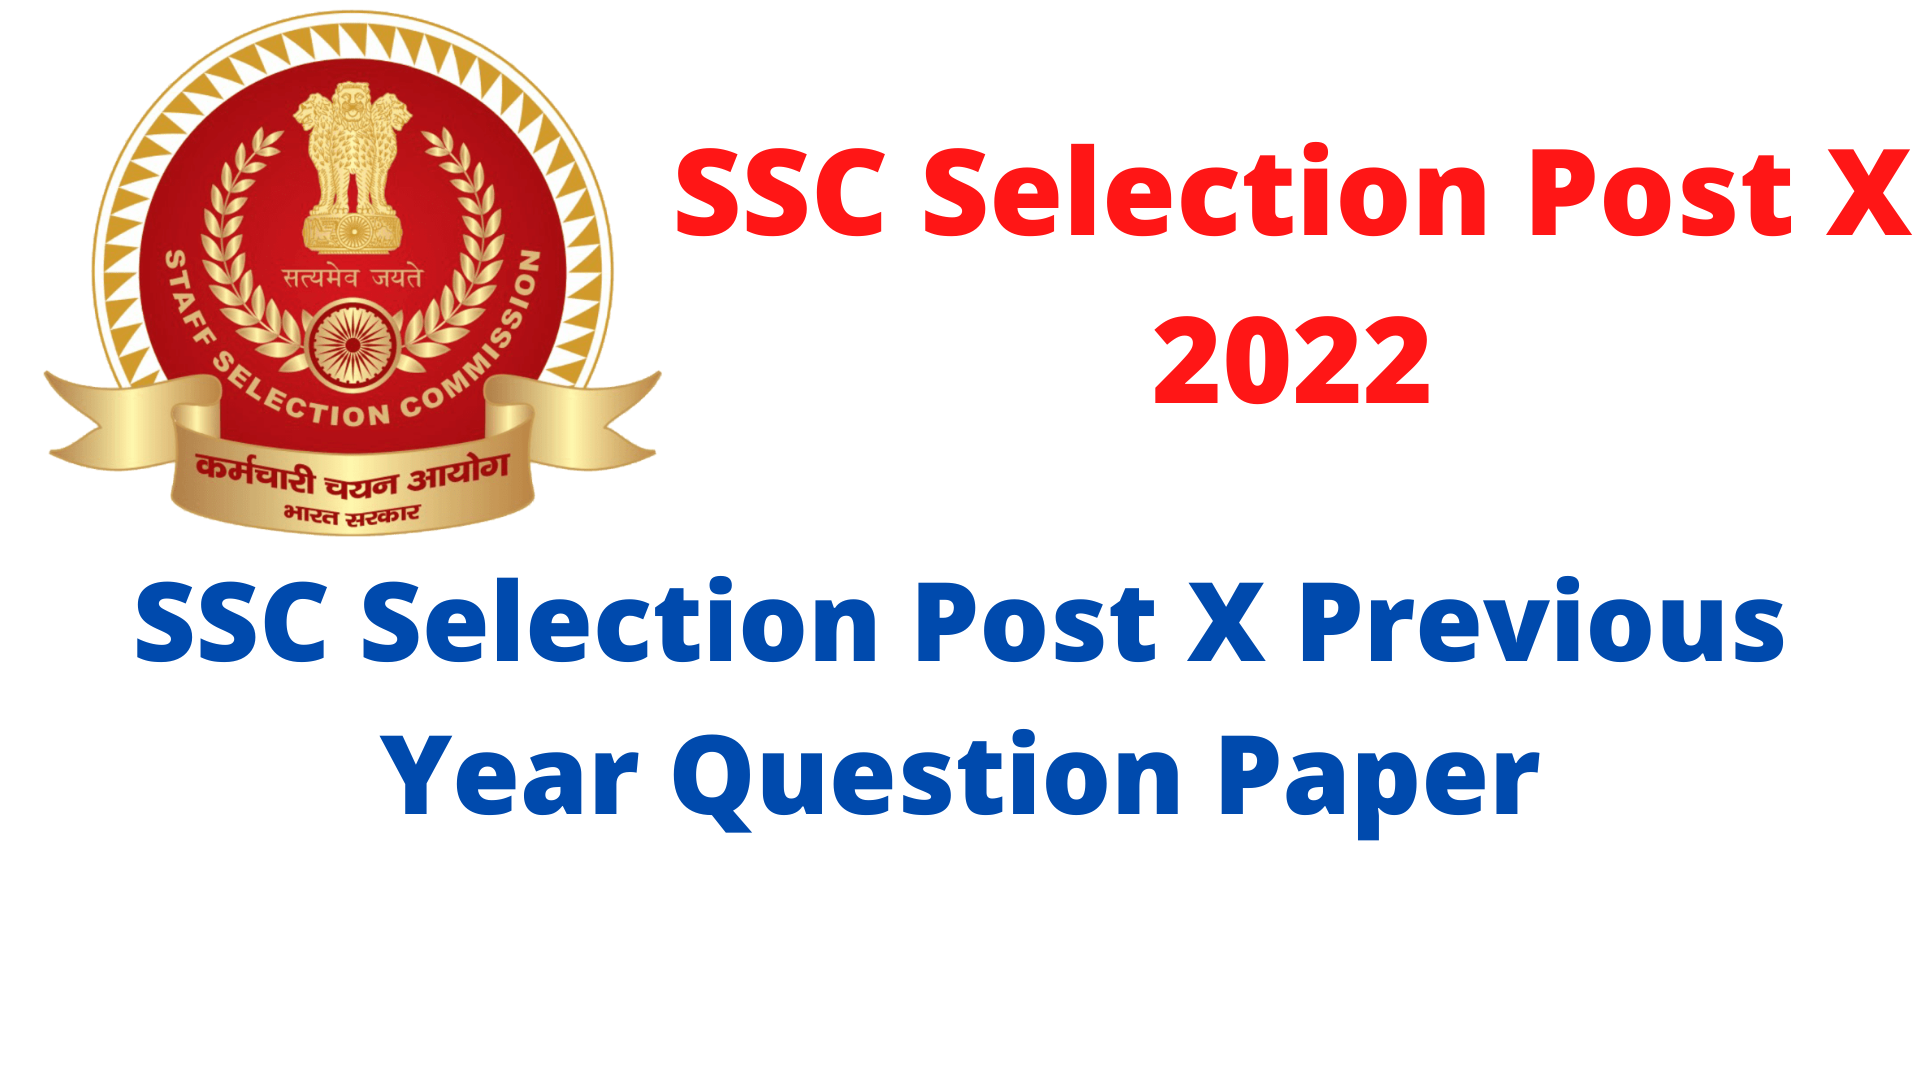 SSC Selection Post X Previous Year Question Paper